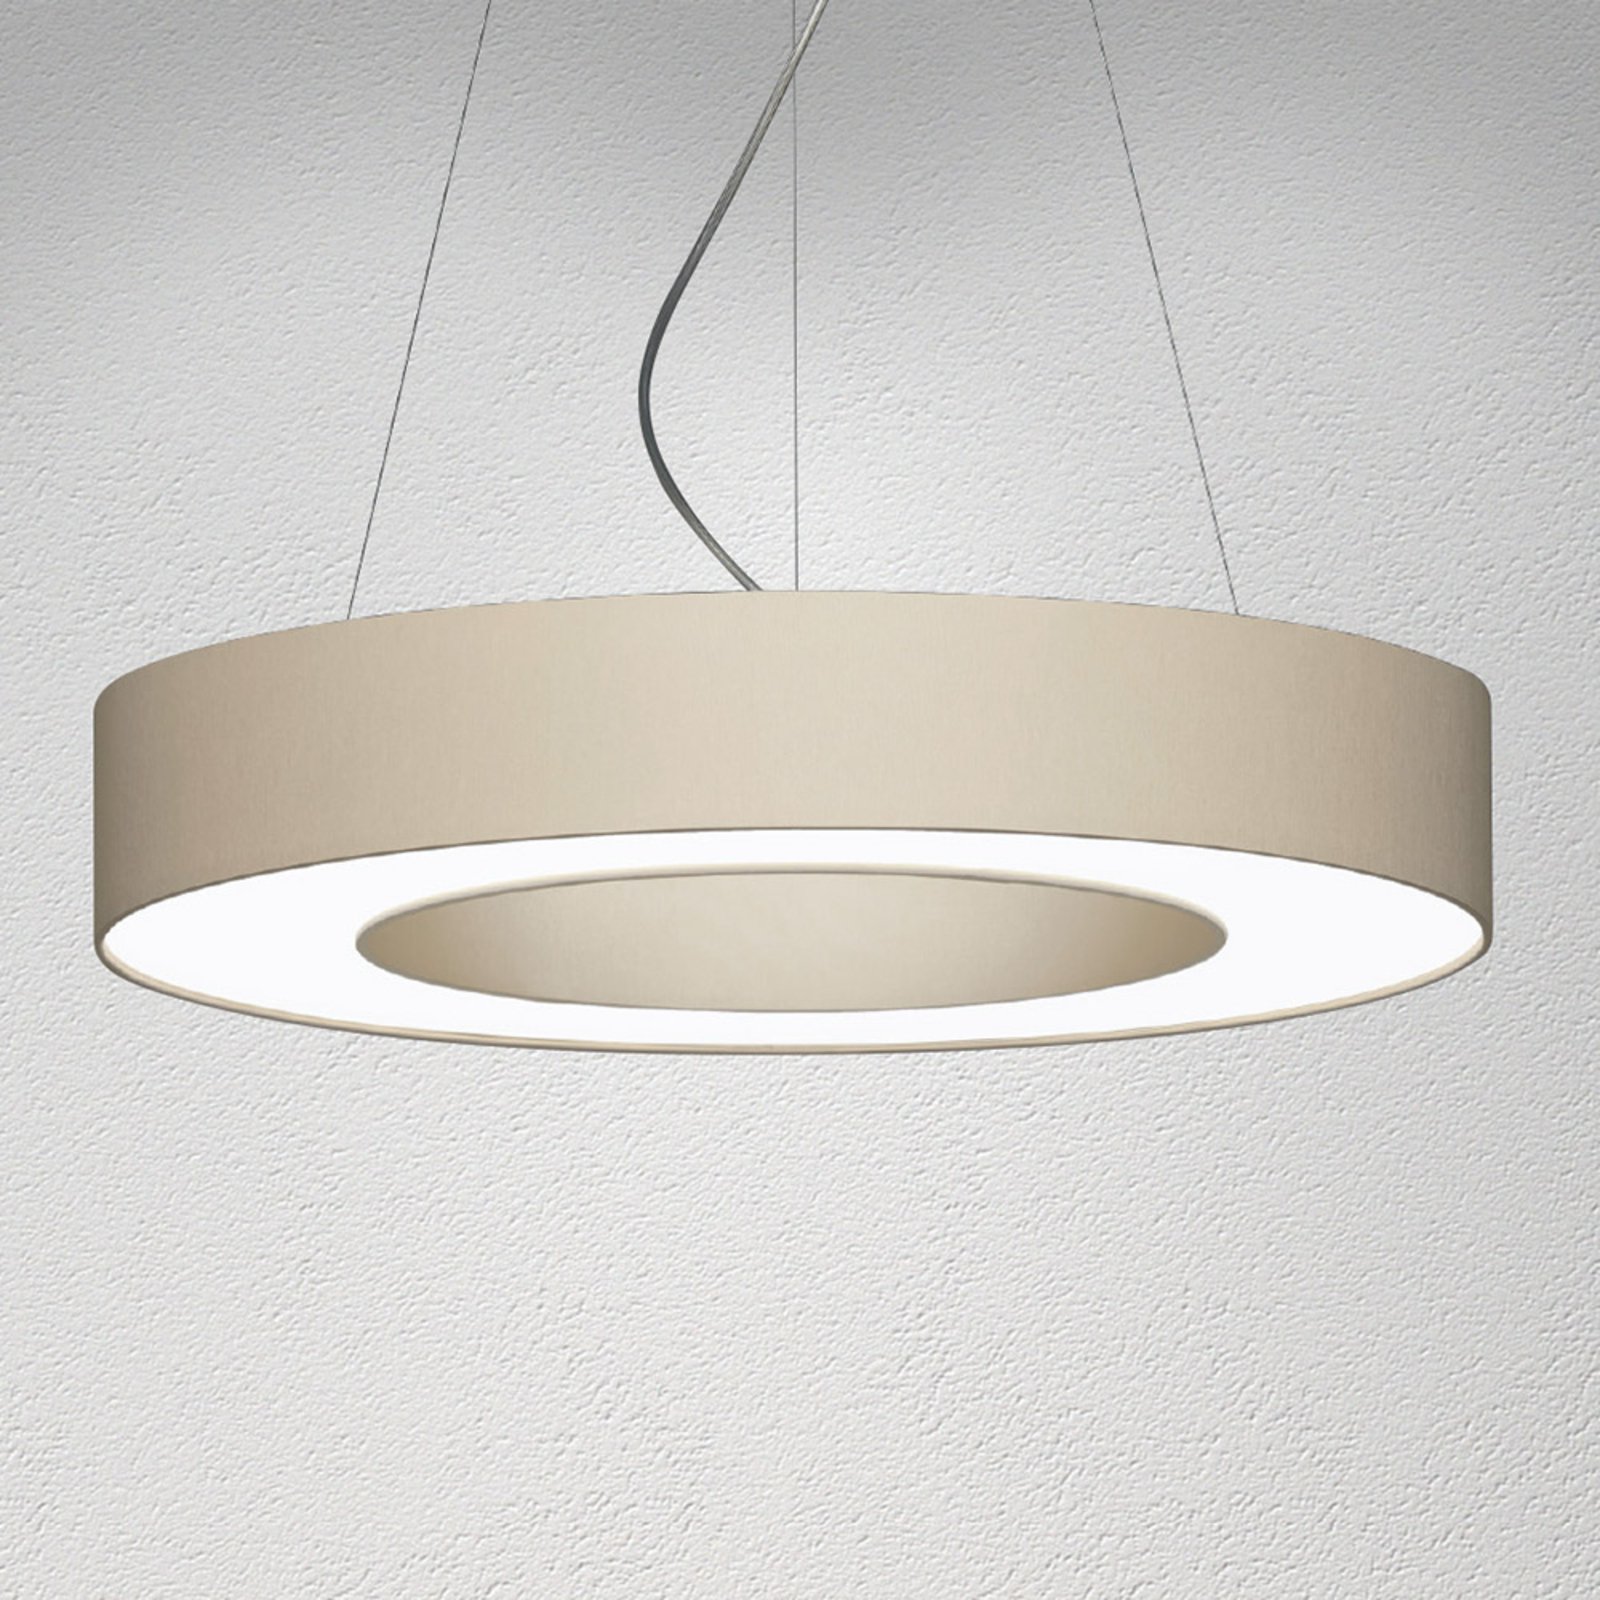 Suspension LED Donut dimmable 22 W mélange